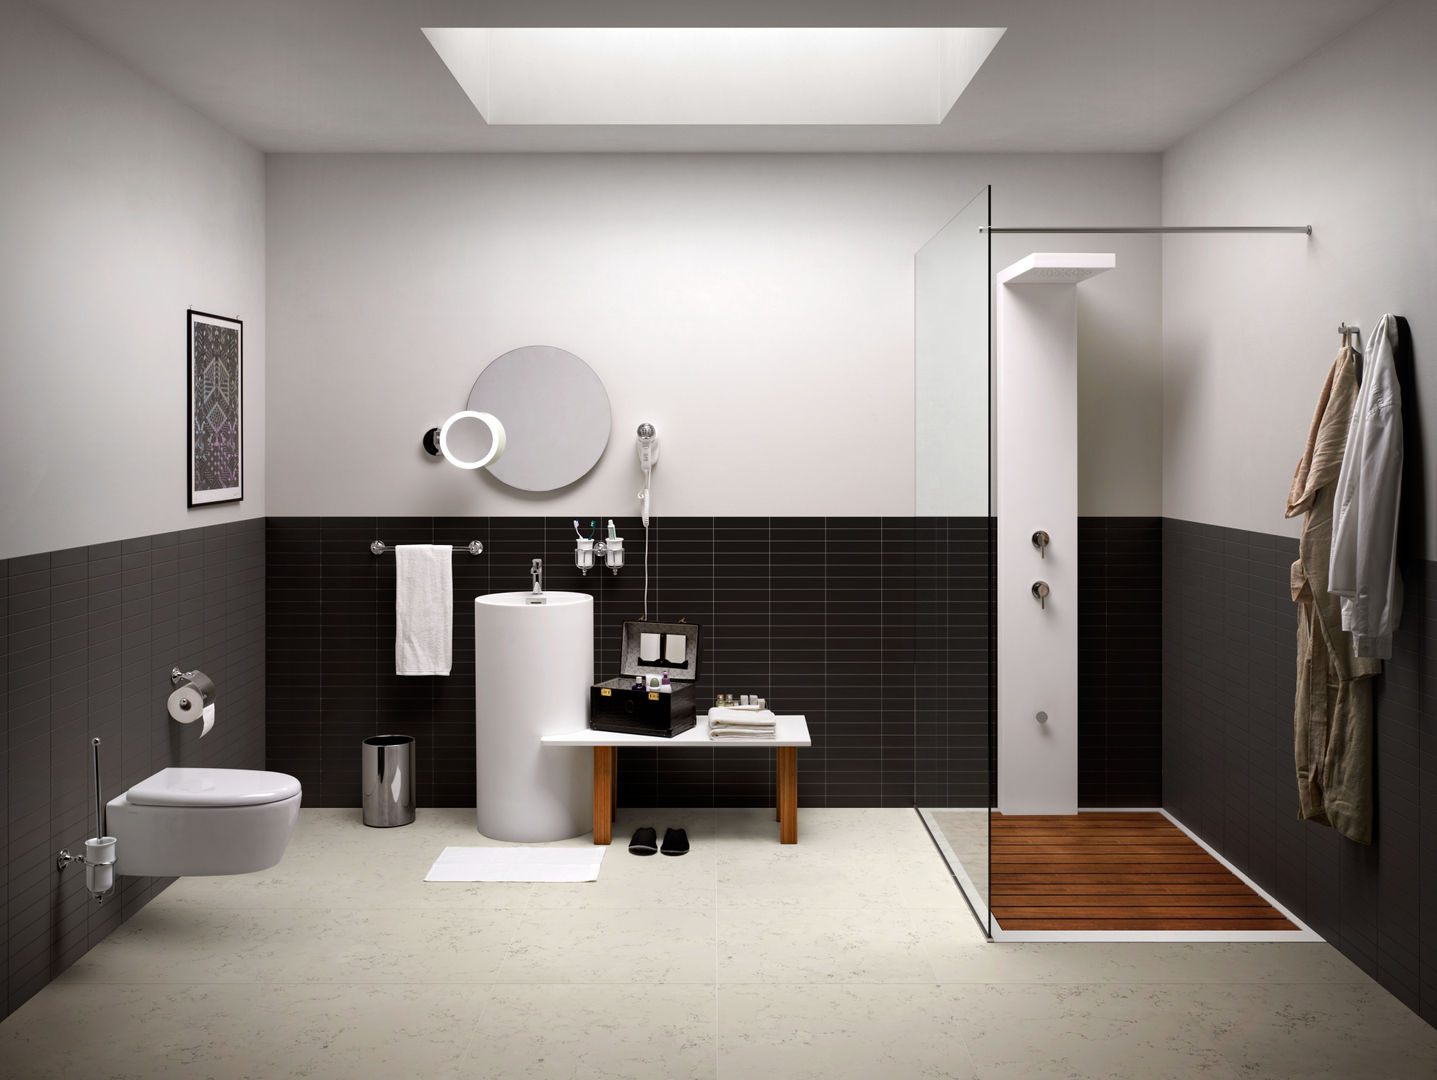 7 BATHROOMS FOR 7 STORIES, Lineabeta Lineabeta Eclectic style bathroom